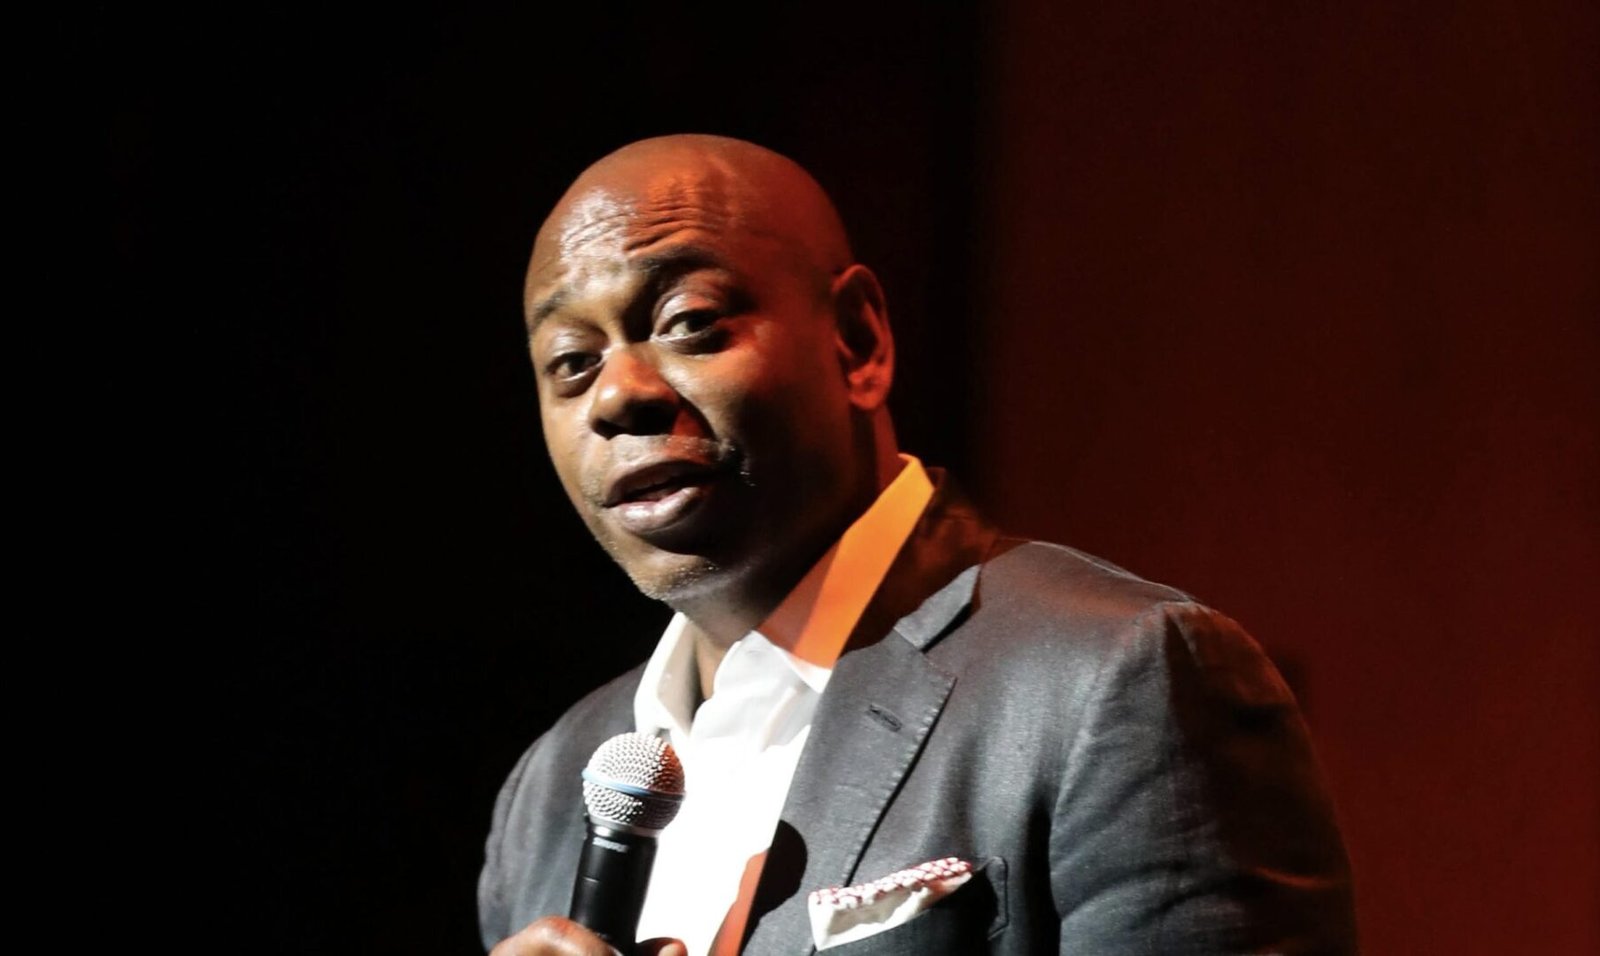 Isaiah Lee Sentenced To 270 Days In Jail For Tackling Dave Chappelle